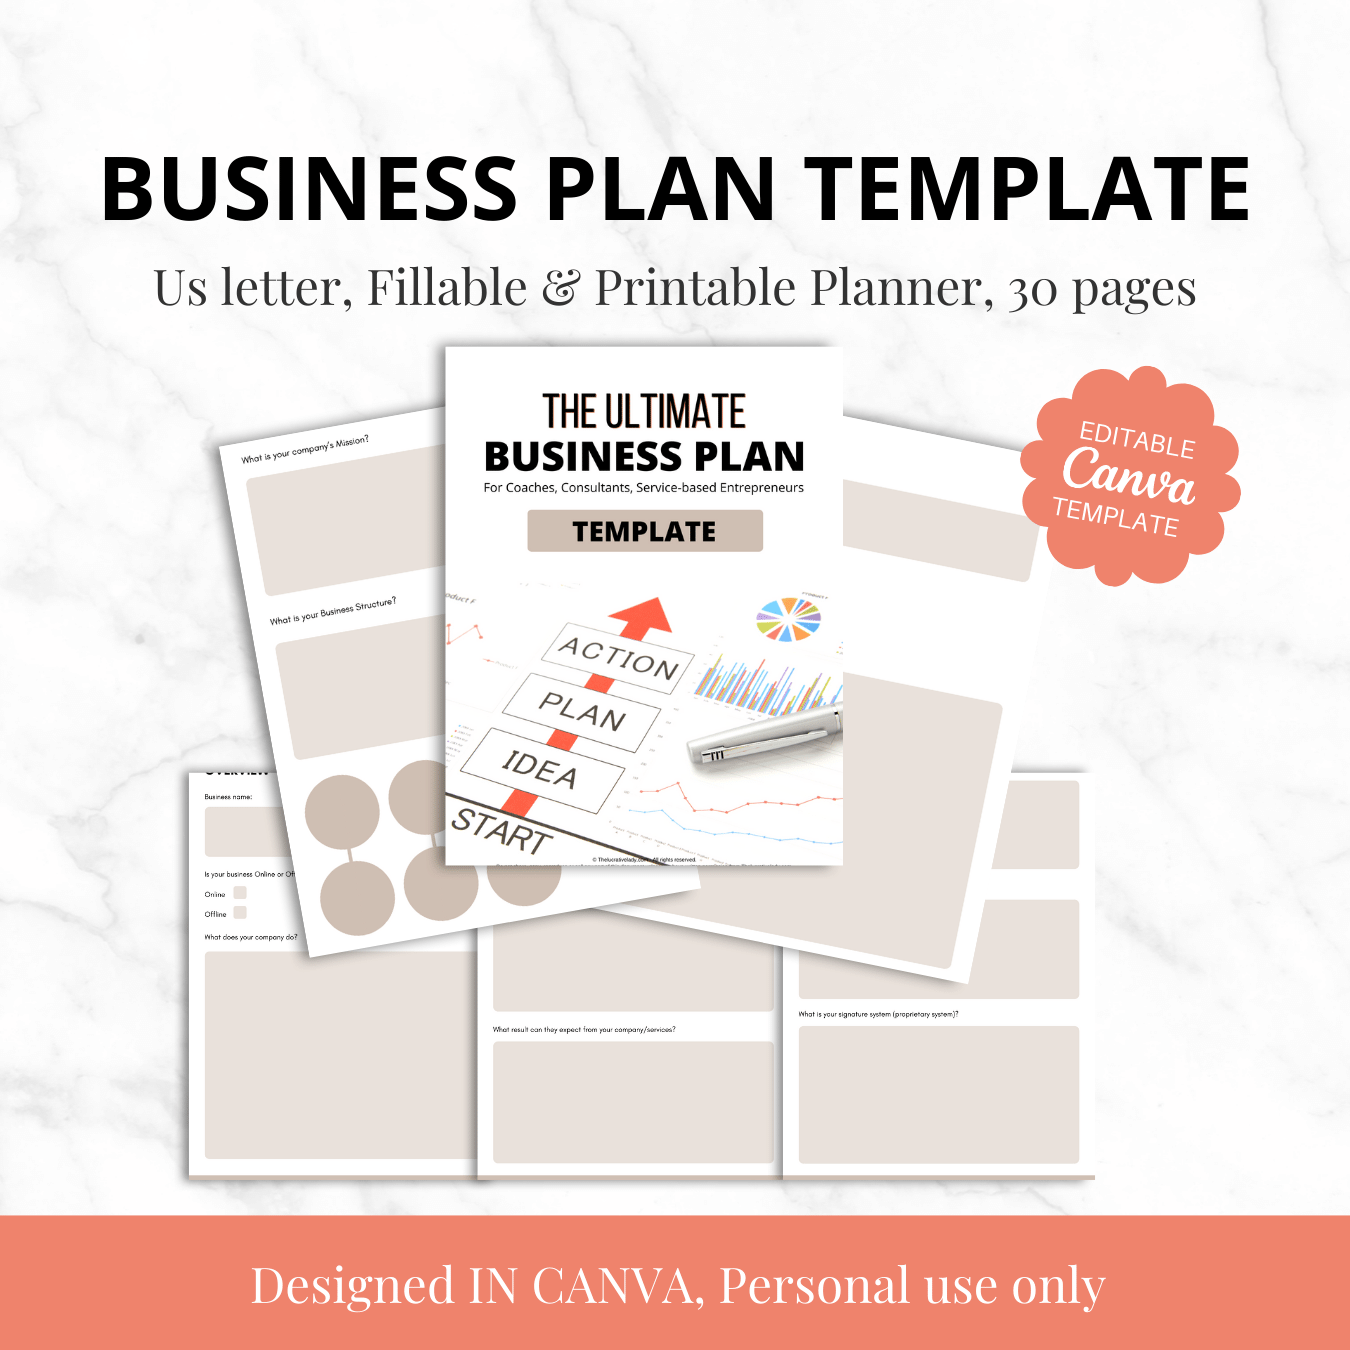 The Ultimate Business Plan Workbook